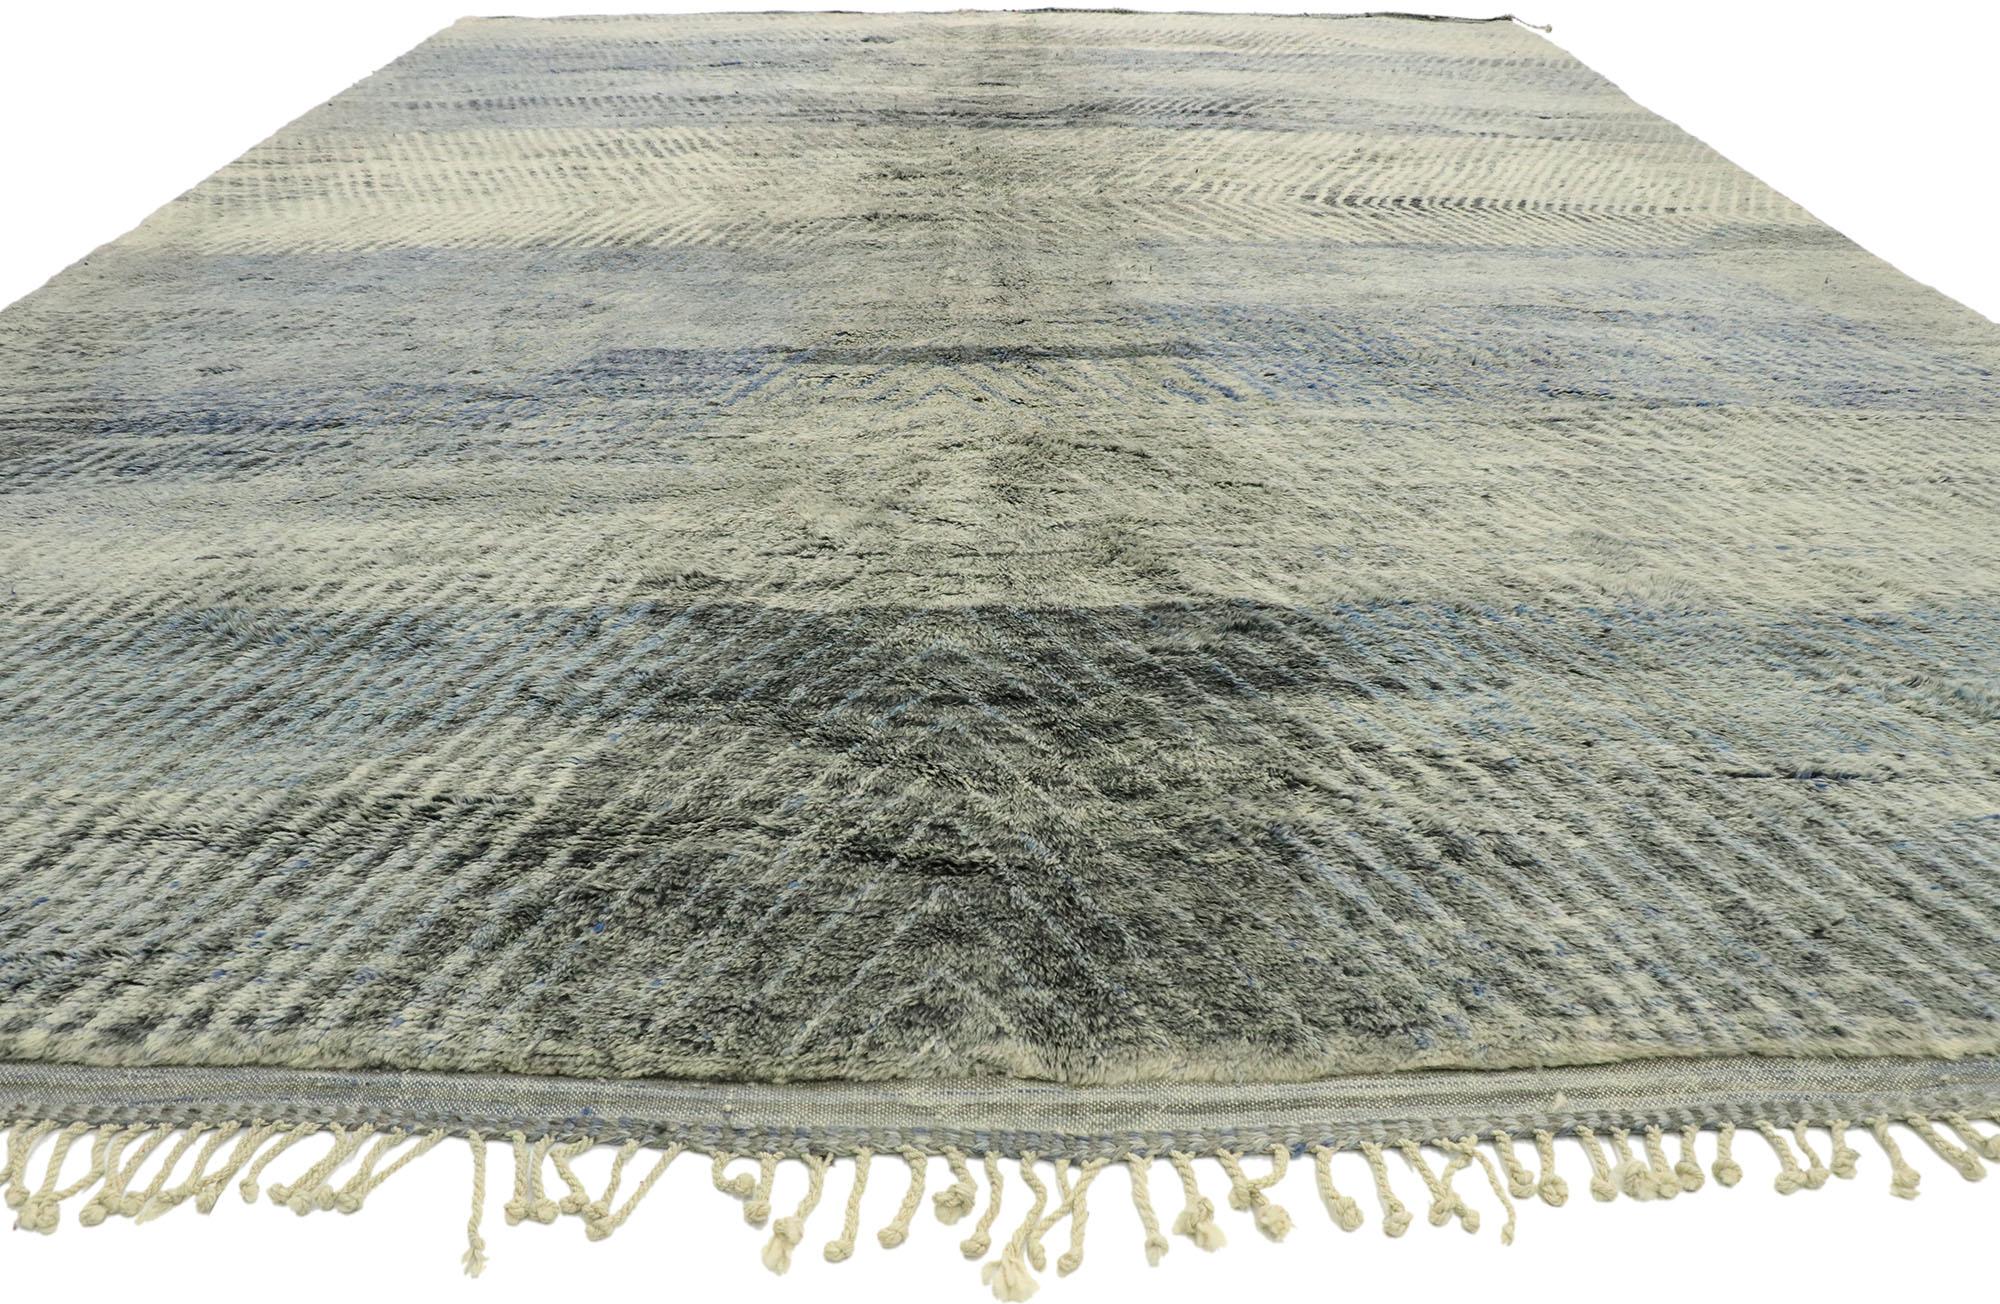 Post-Modern New Contemporary Berber Moroccan Rug with Abstract Linear Design and Plush Pile